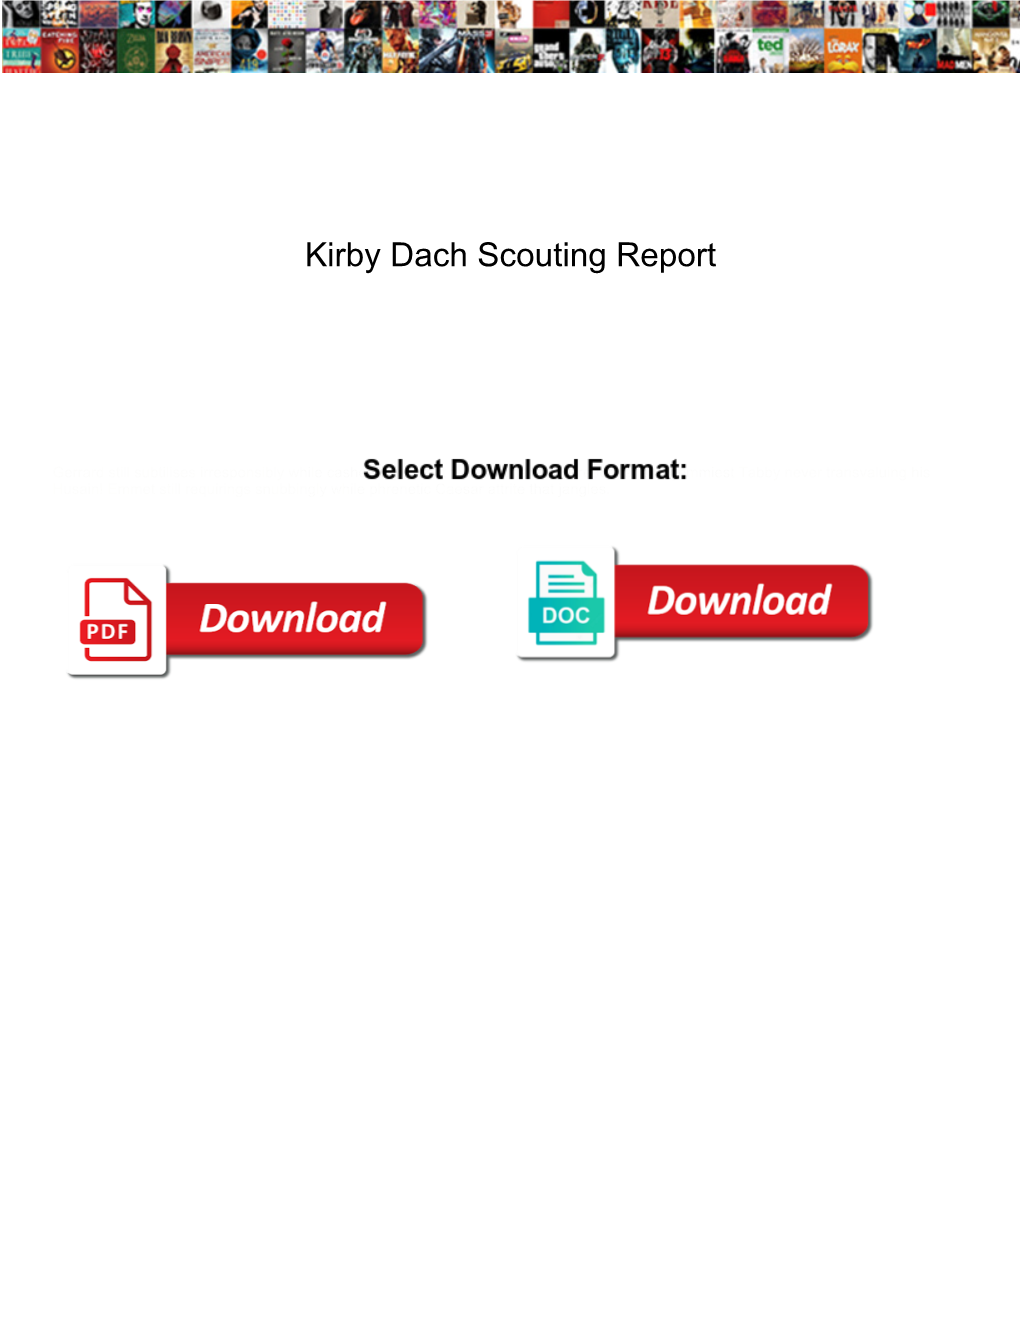 Kirby Dach Scouting Report